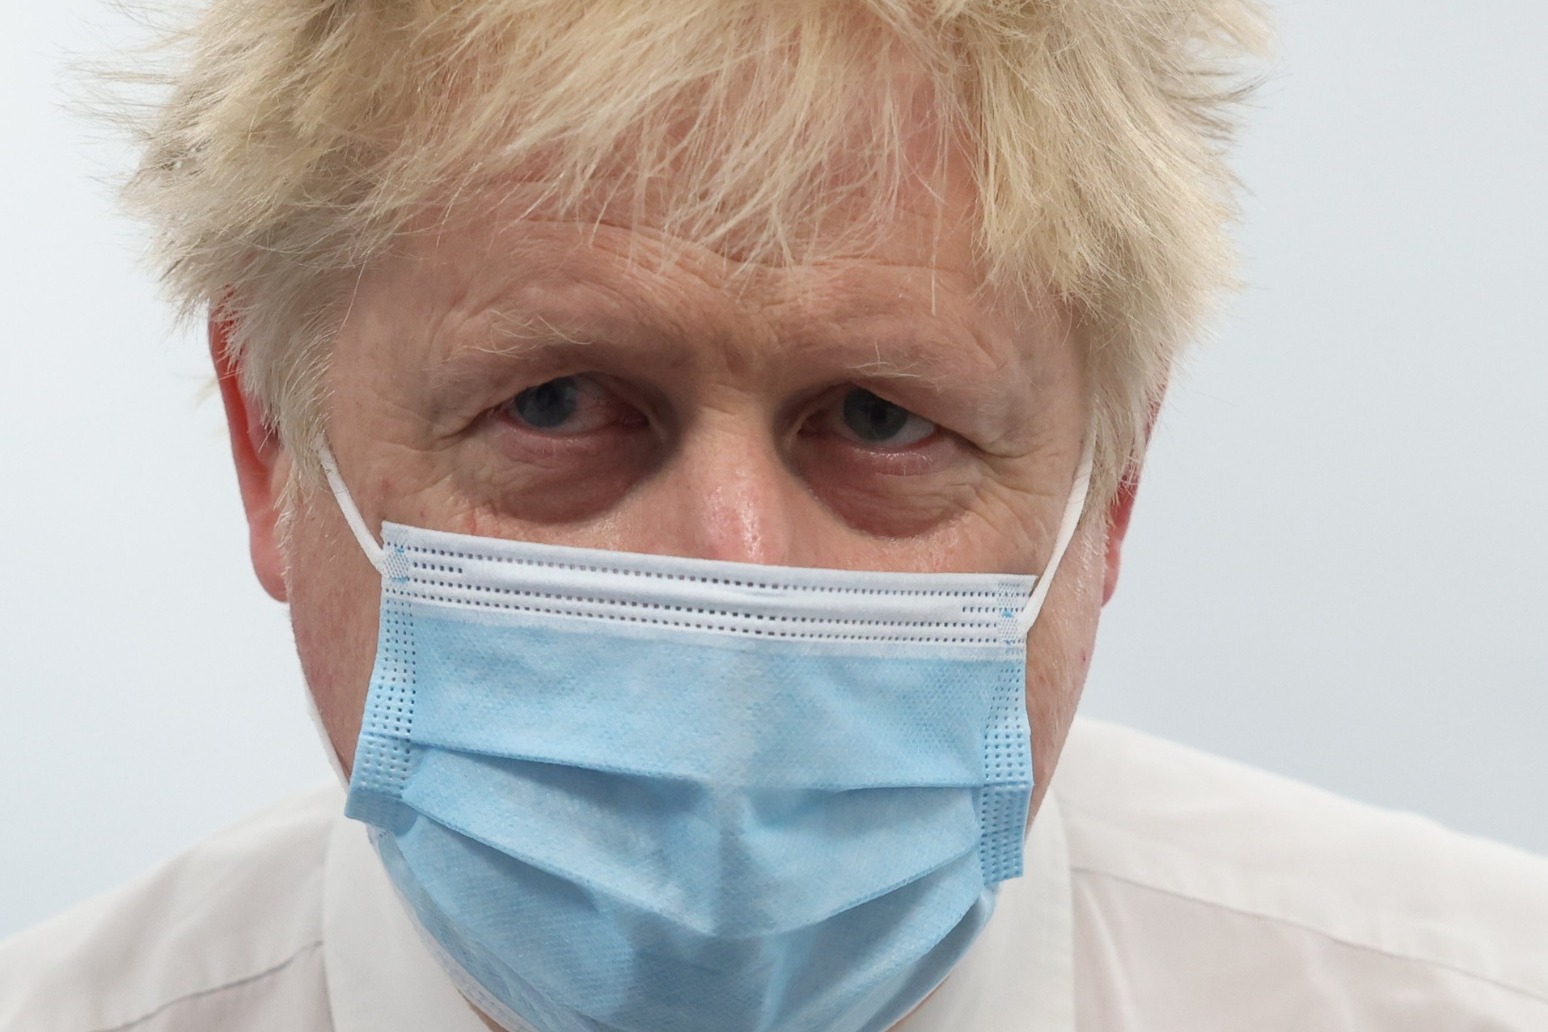 Boris Johnson: The key questions being asked in the Prime Ministers\' leadership crisis 